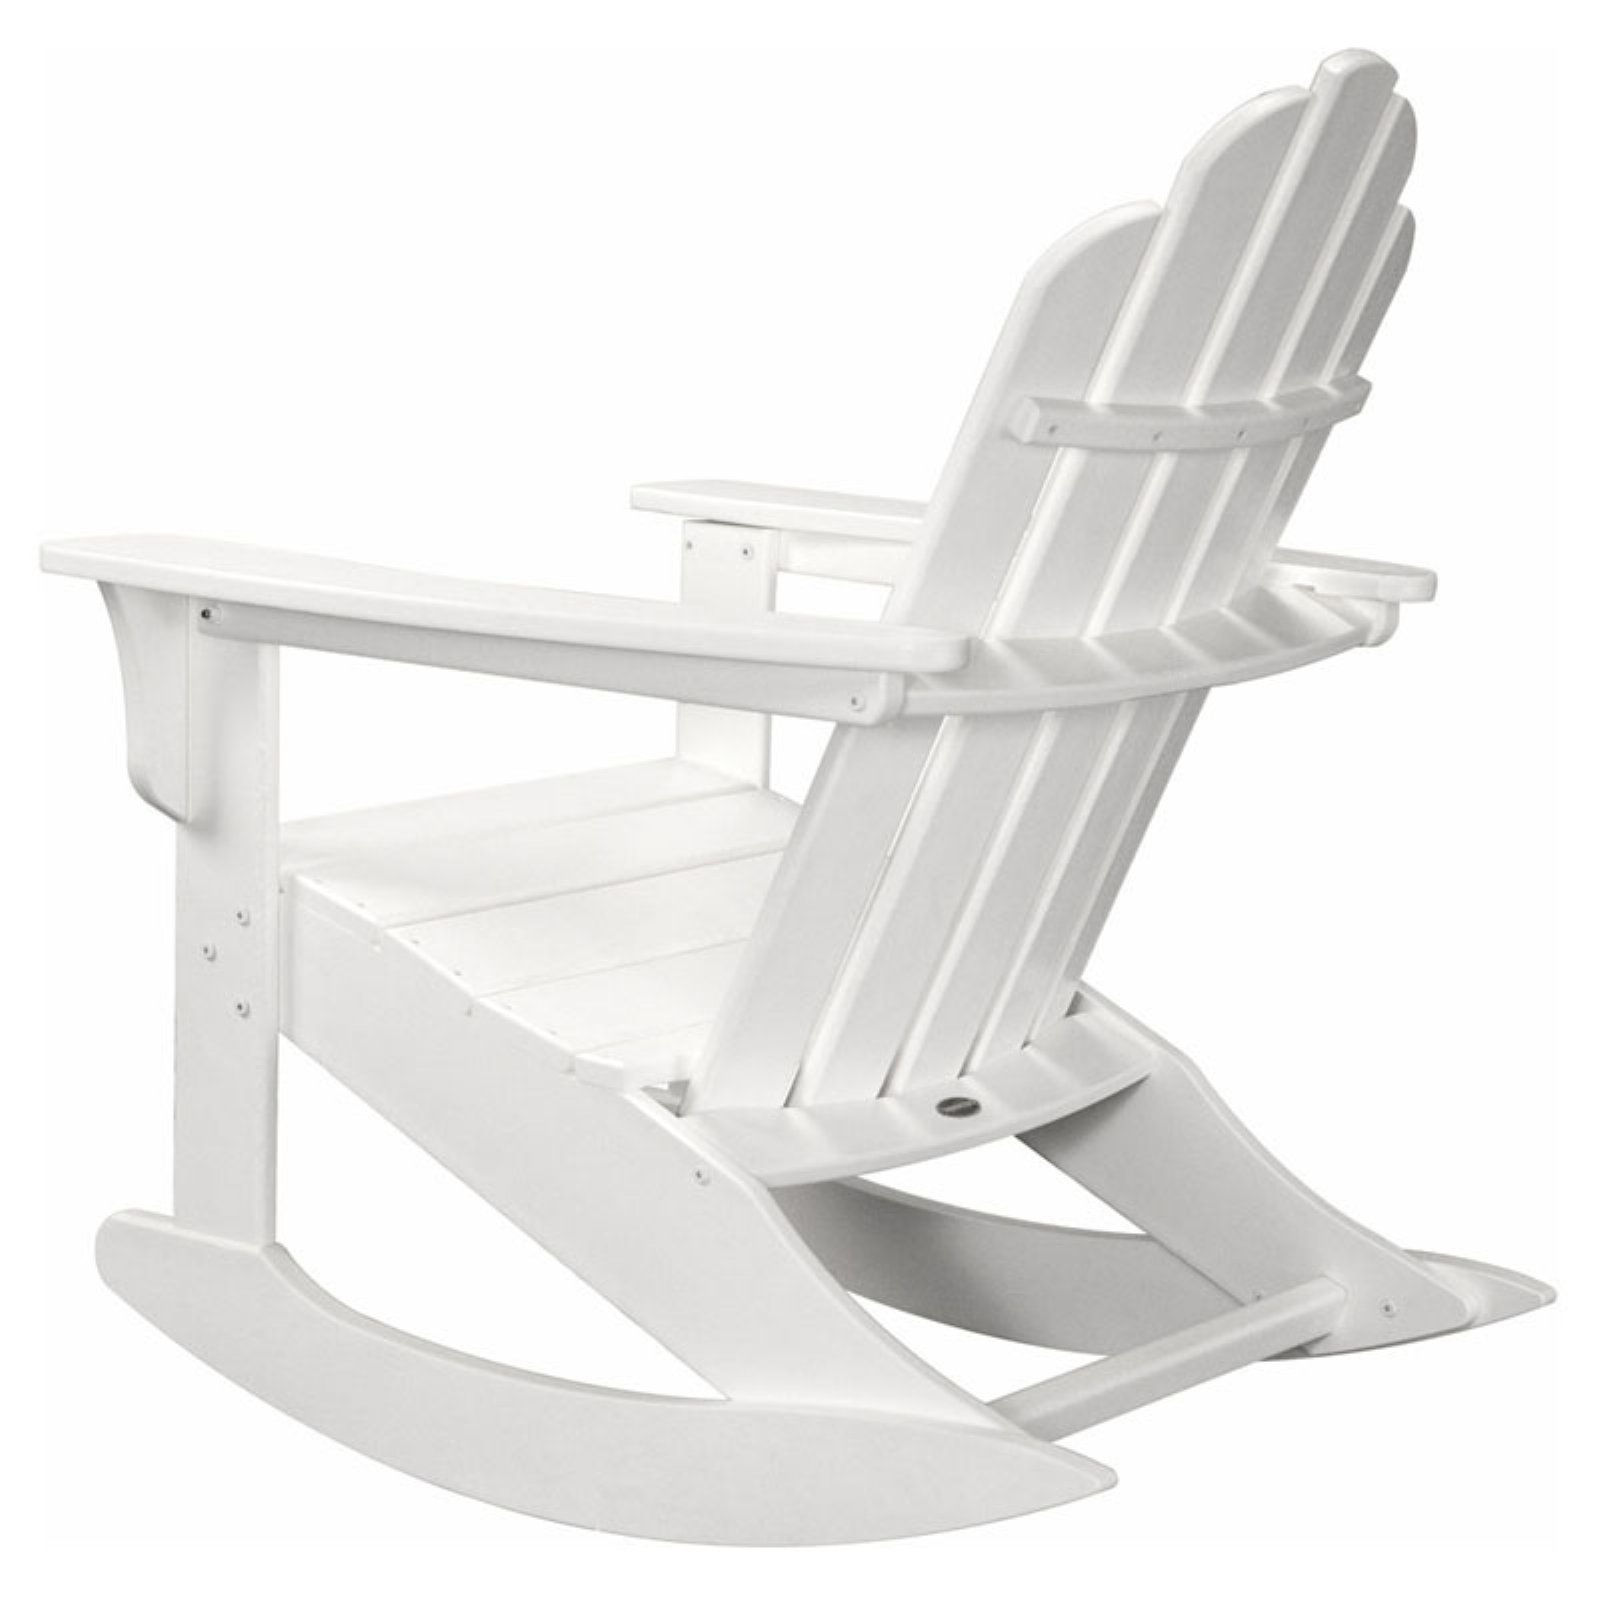 Hanover All-Weather Adirondack Rocking Chair in Aruba - image 2 of 4